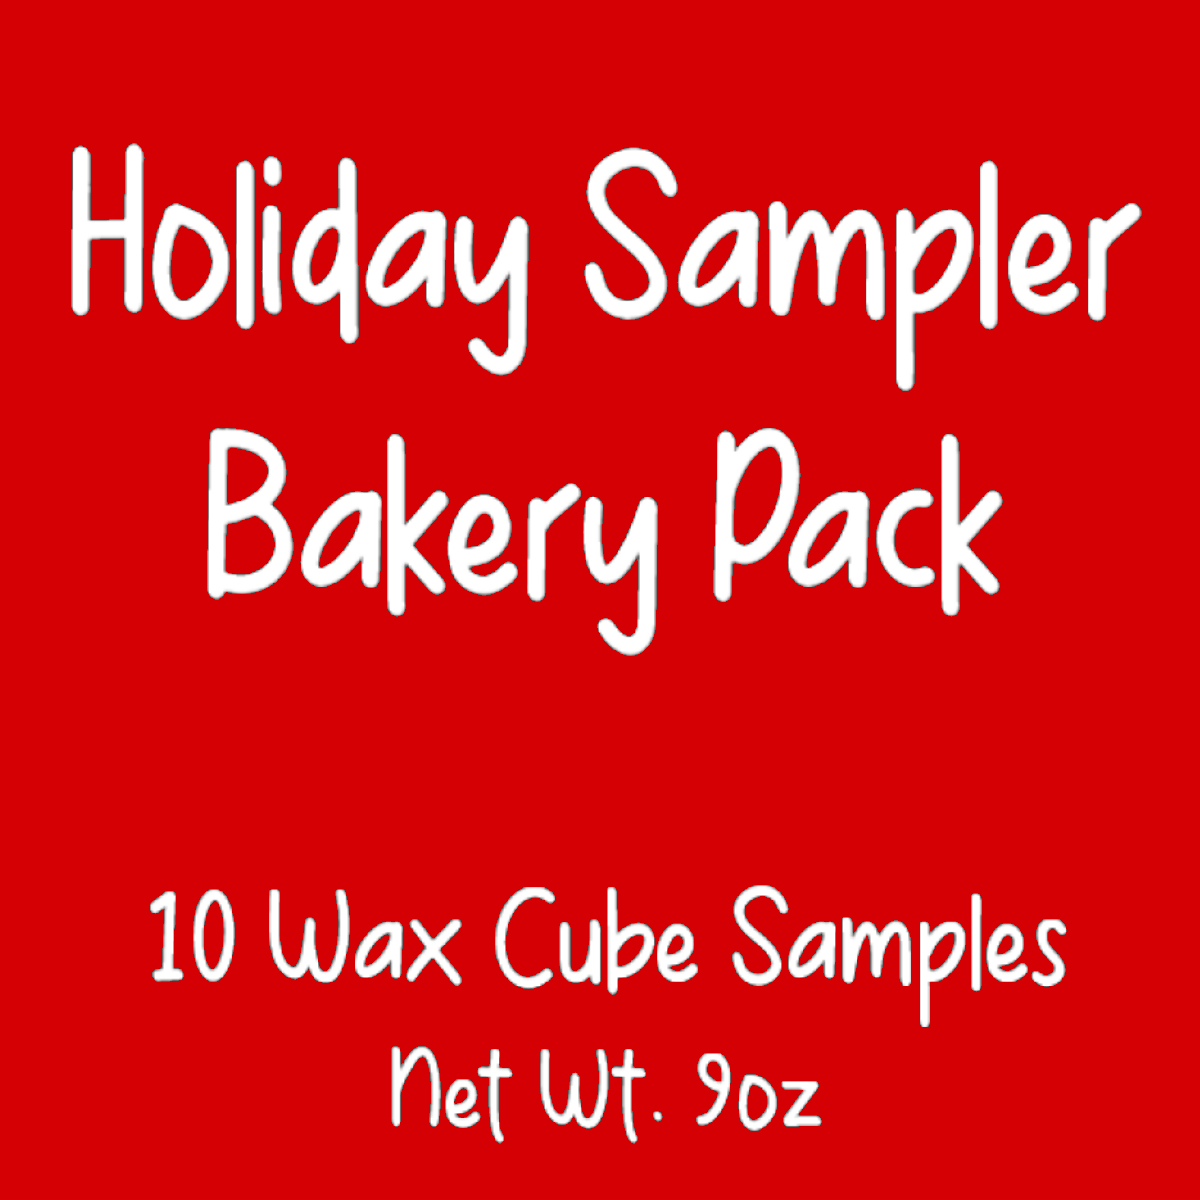 Holiday Sampler Bakery Pack - 10 Wax Cube Samples - 9oz Clamshell